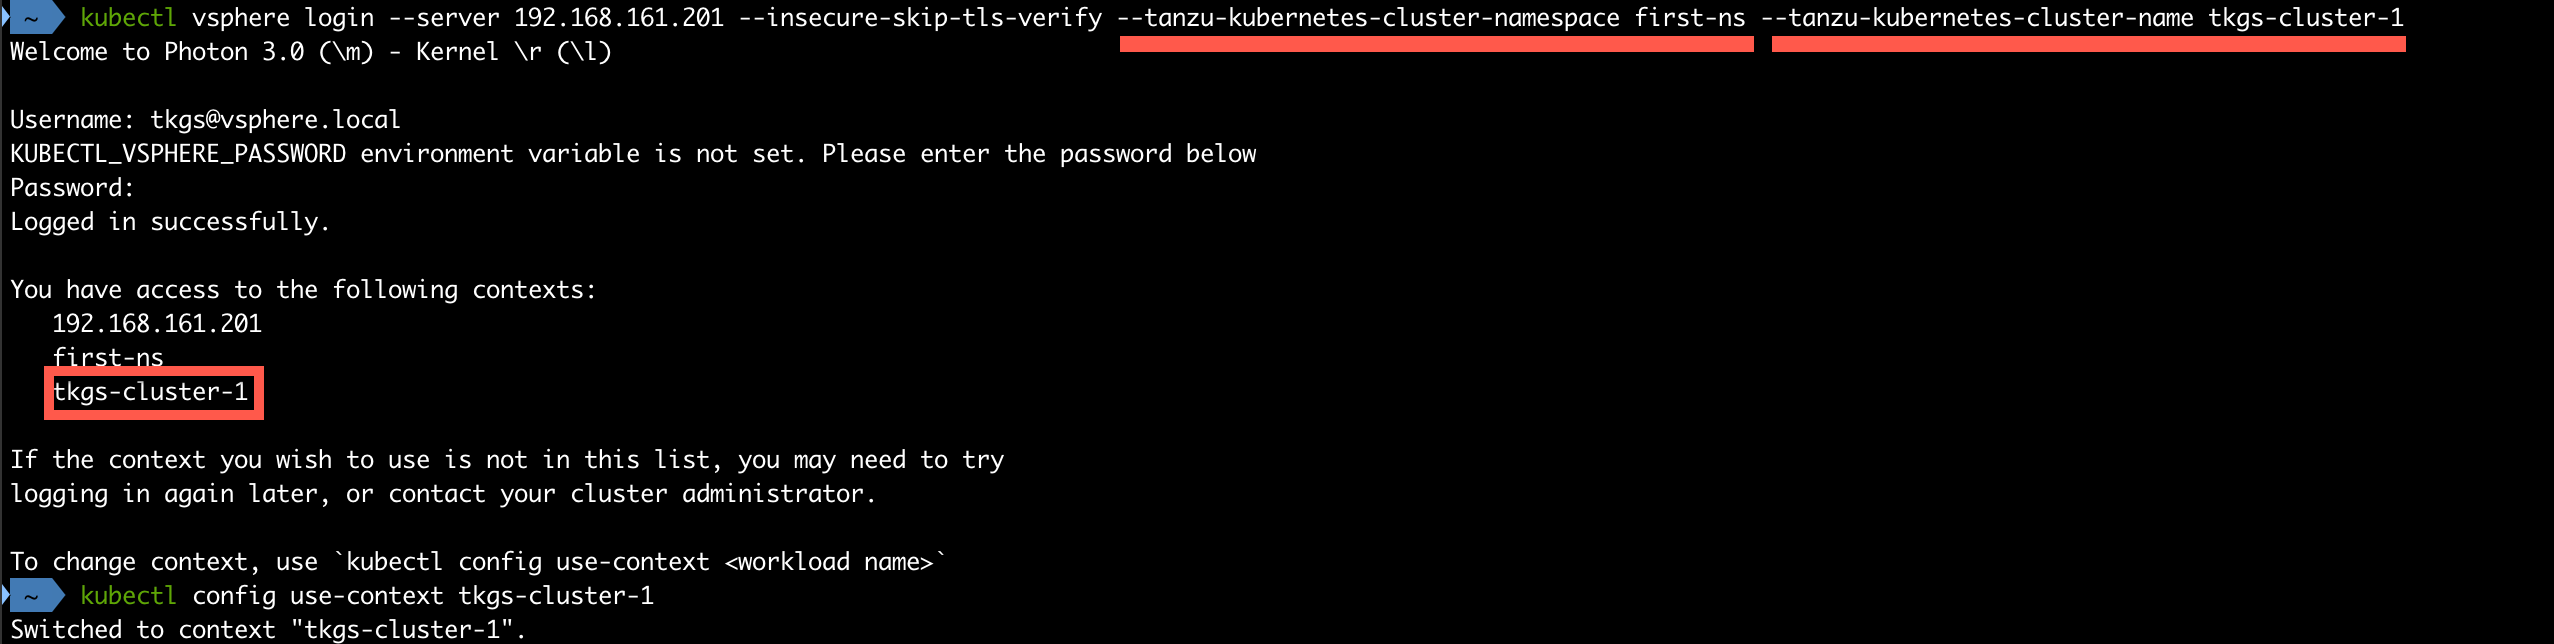 Logged in to the new Tanzu Kubernetes Cluster